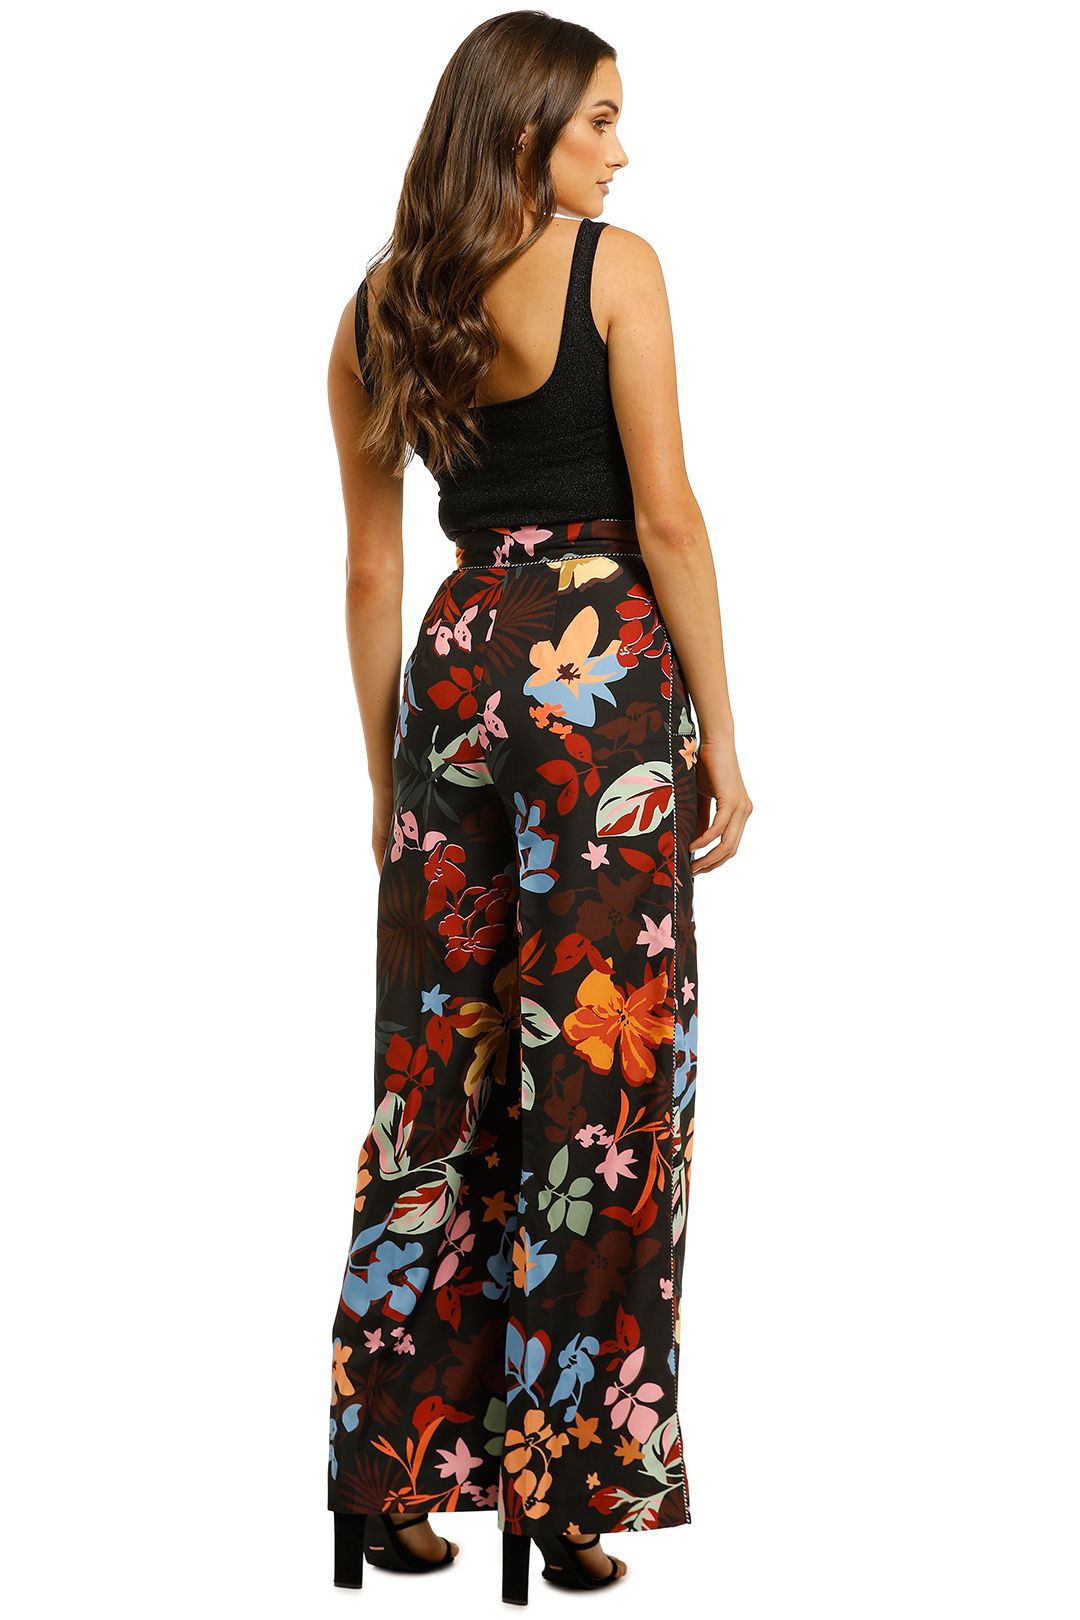 CMEO-Collective-Origin-Pant-Black-Abstract-Floral-Back